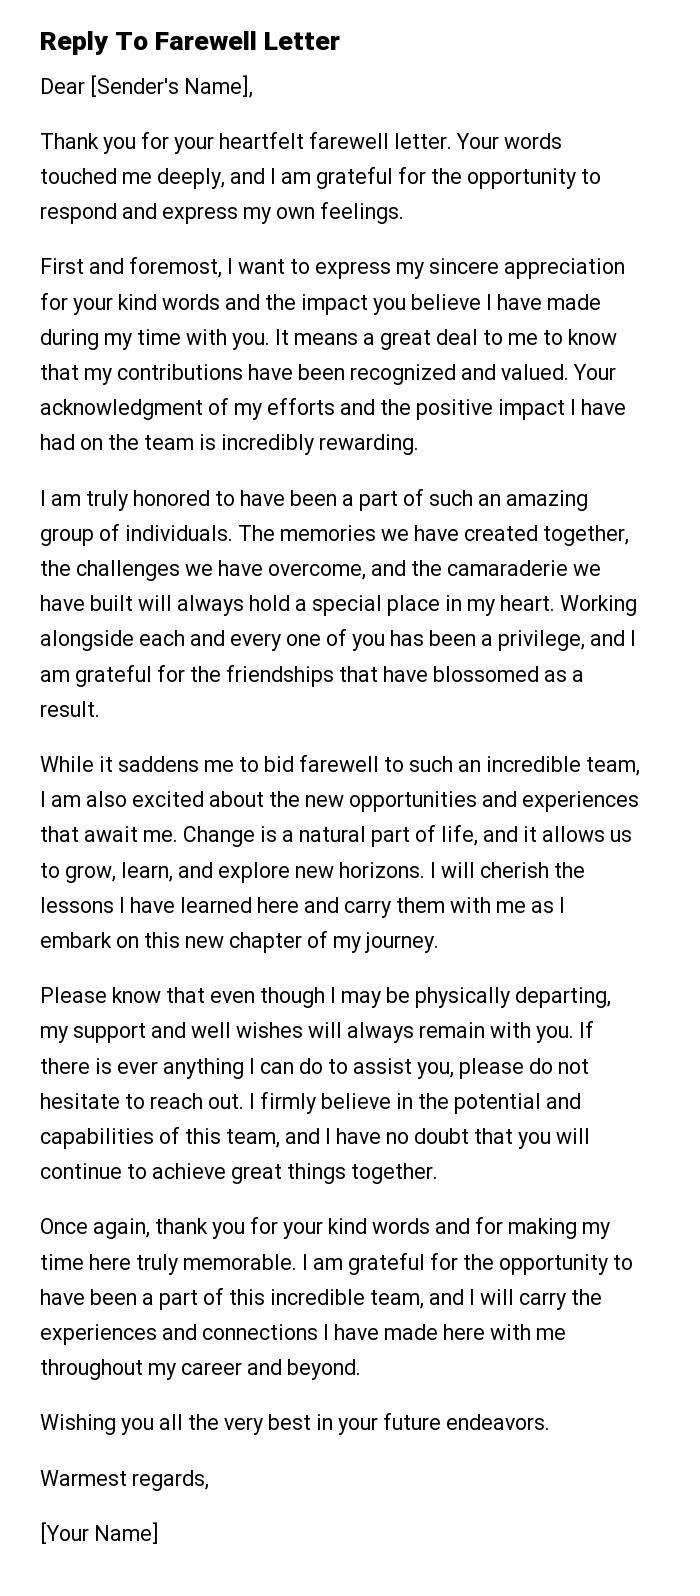 Reply To Farewell Letter